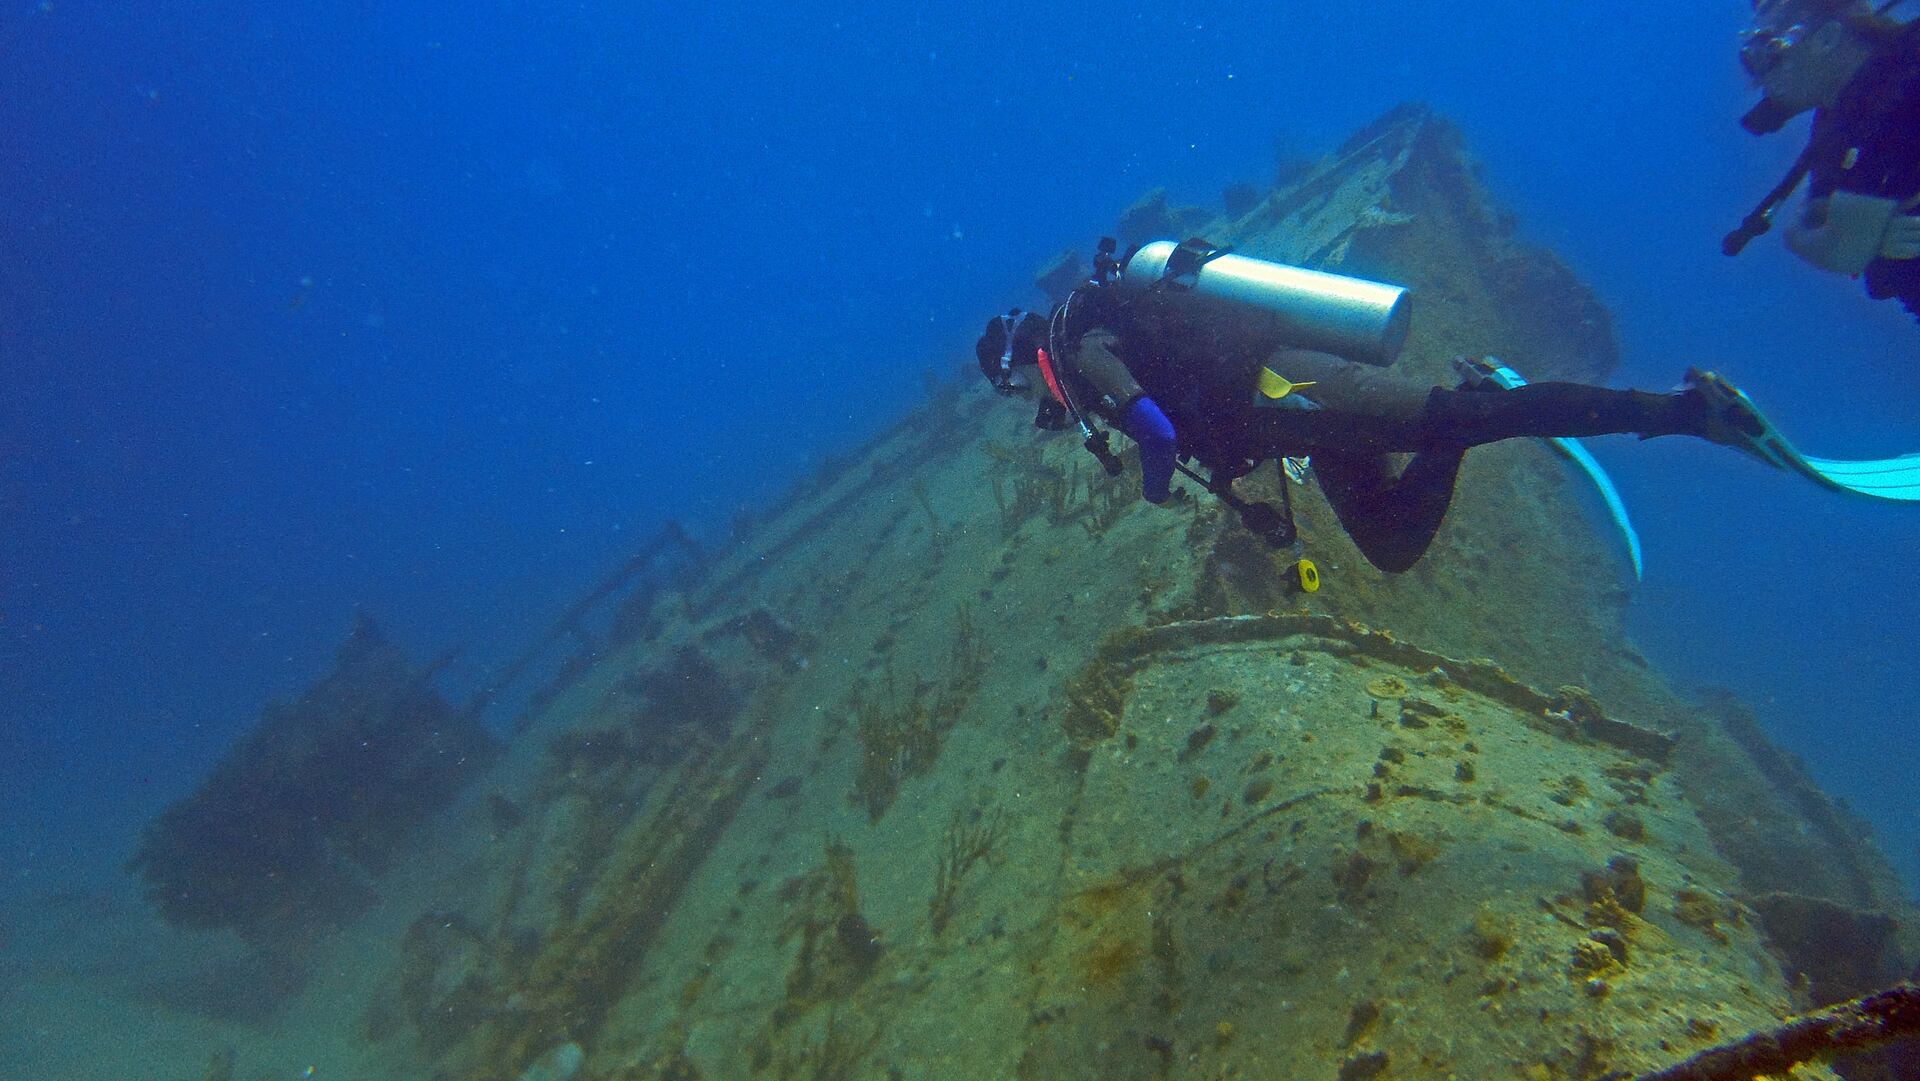 Diver in the water next to an old ship